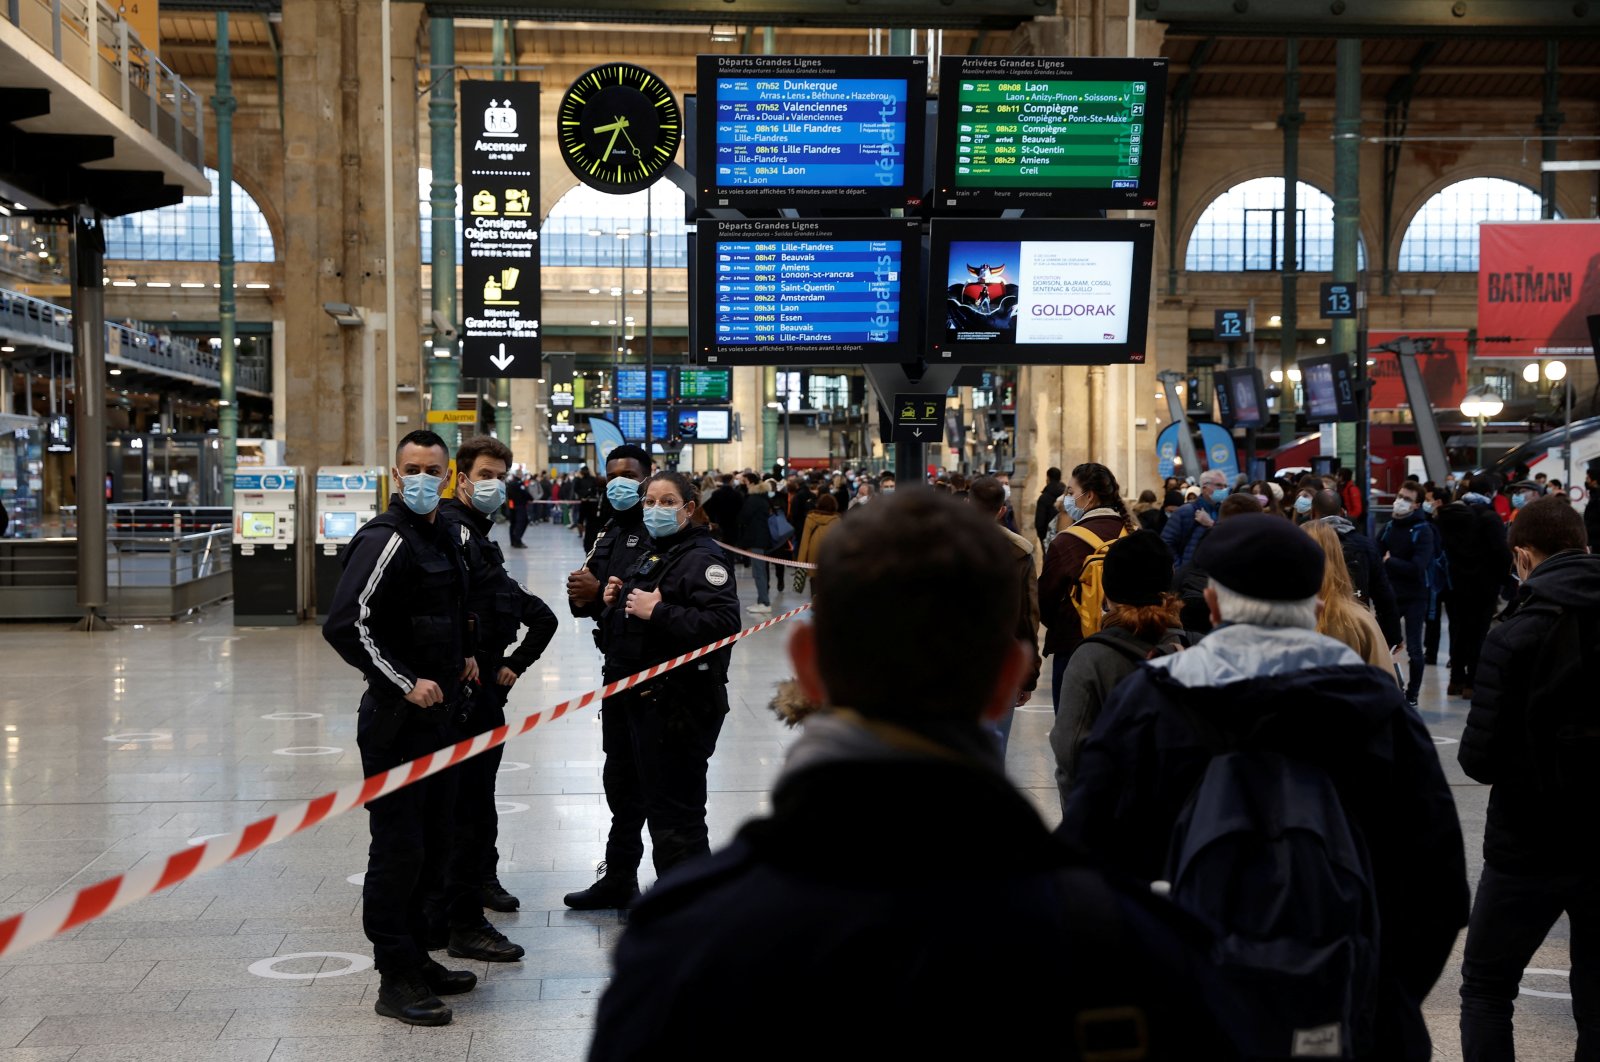 French police secure the scene after French police killed a person who attacked them with a knife at Gare du Nord station in Paris, France, Feb. 14, 2022. (Reuters Photo)